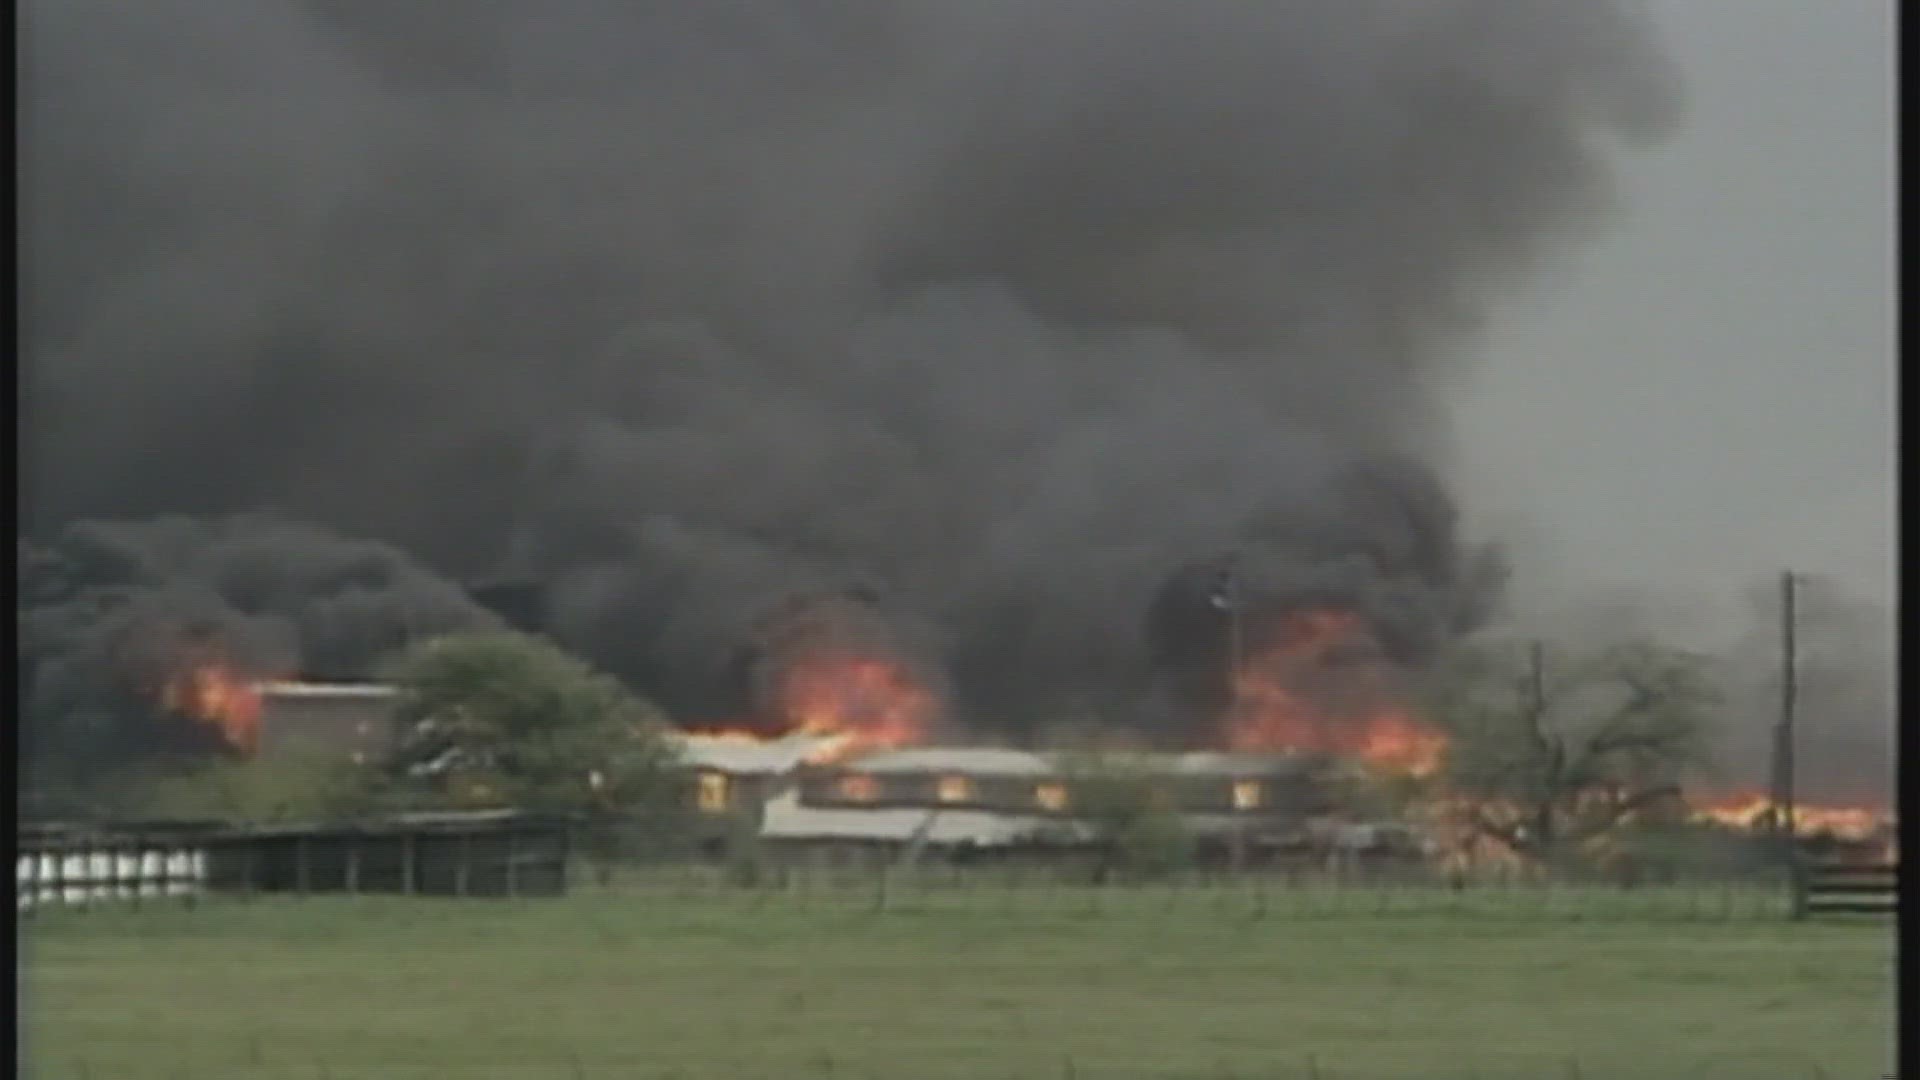 Officials say 82 Branch Davidians including 24 children were killed in the incident.